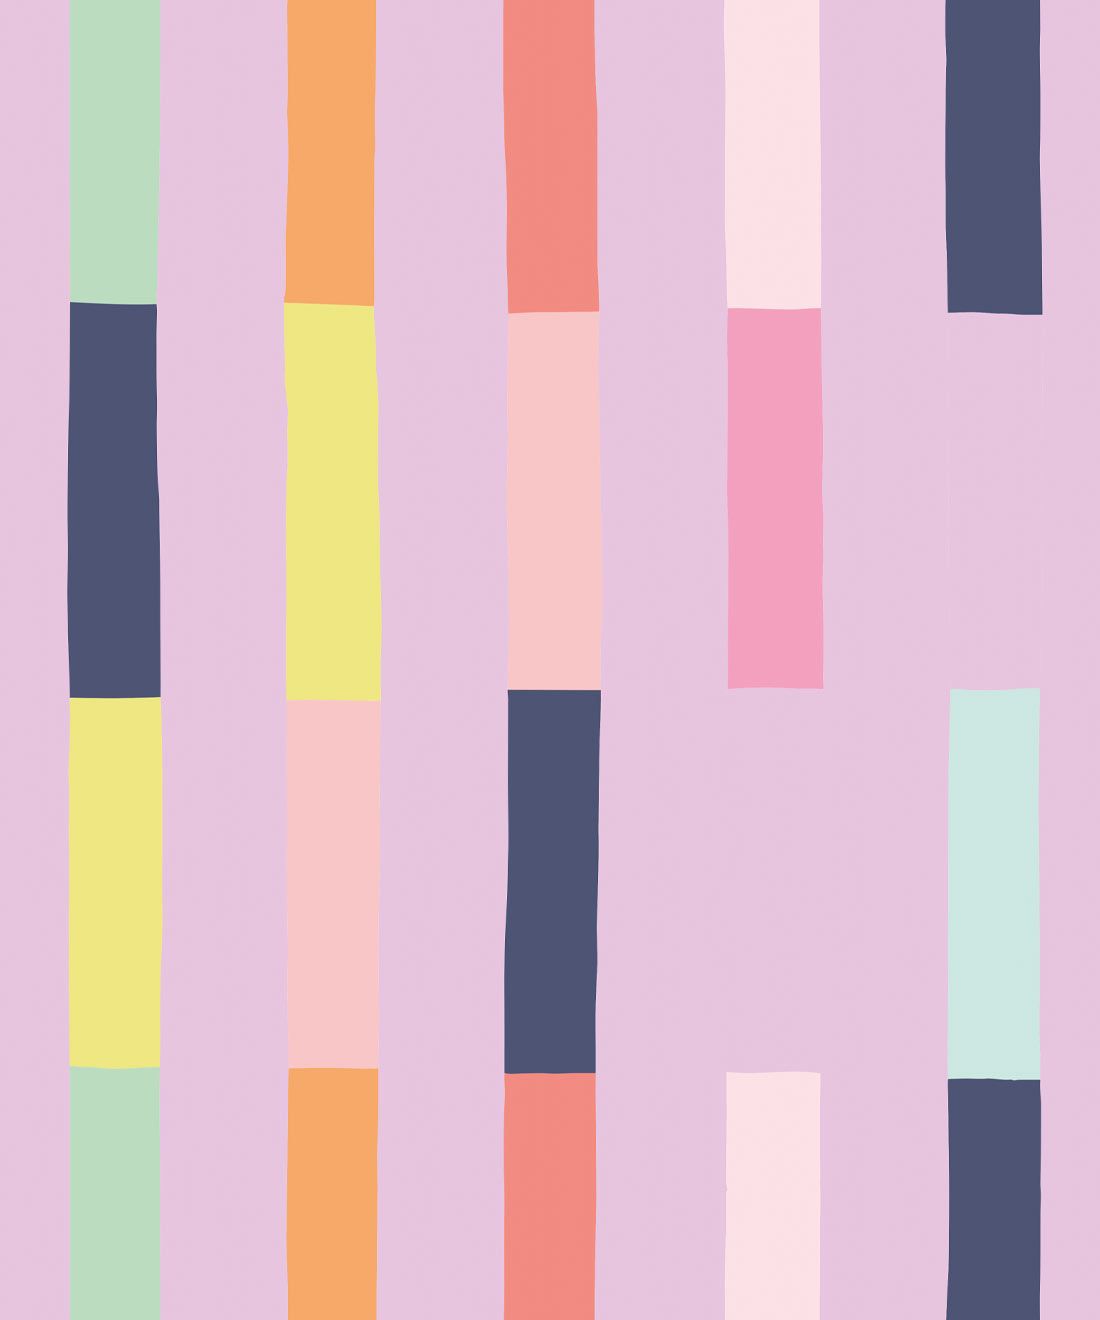 A pattern of varying colored rectangles on a purple background - Pastel rainbow